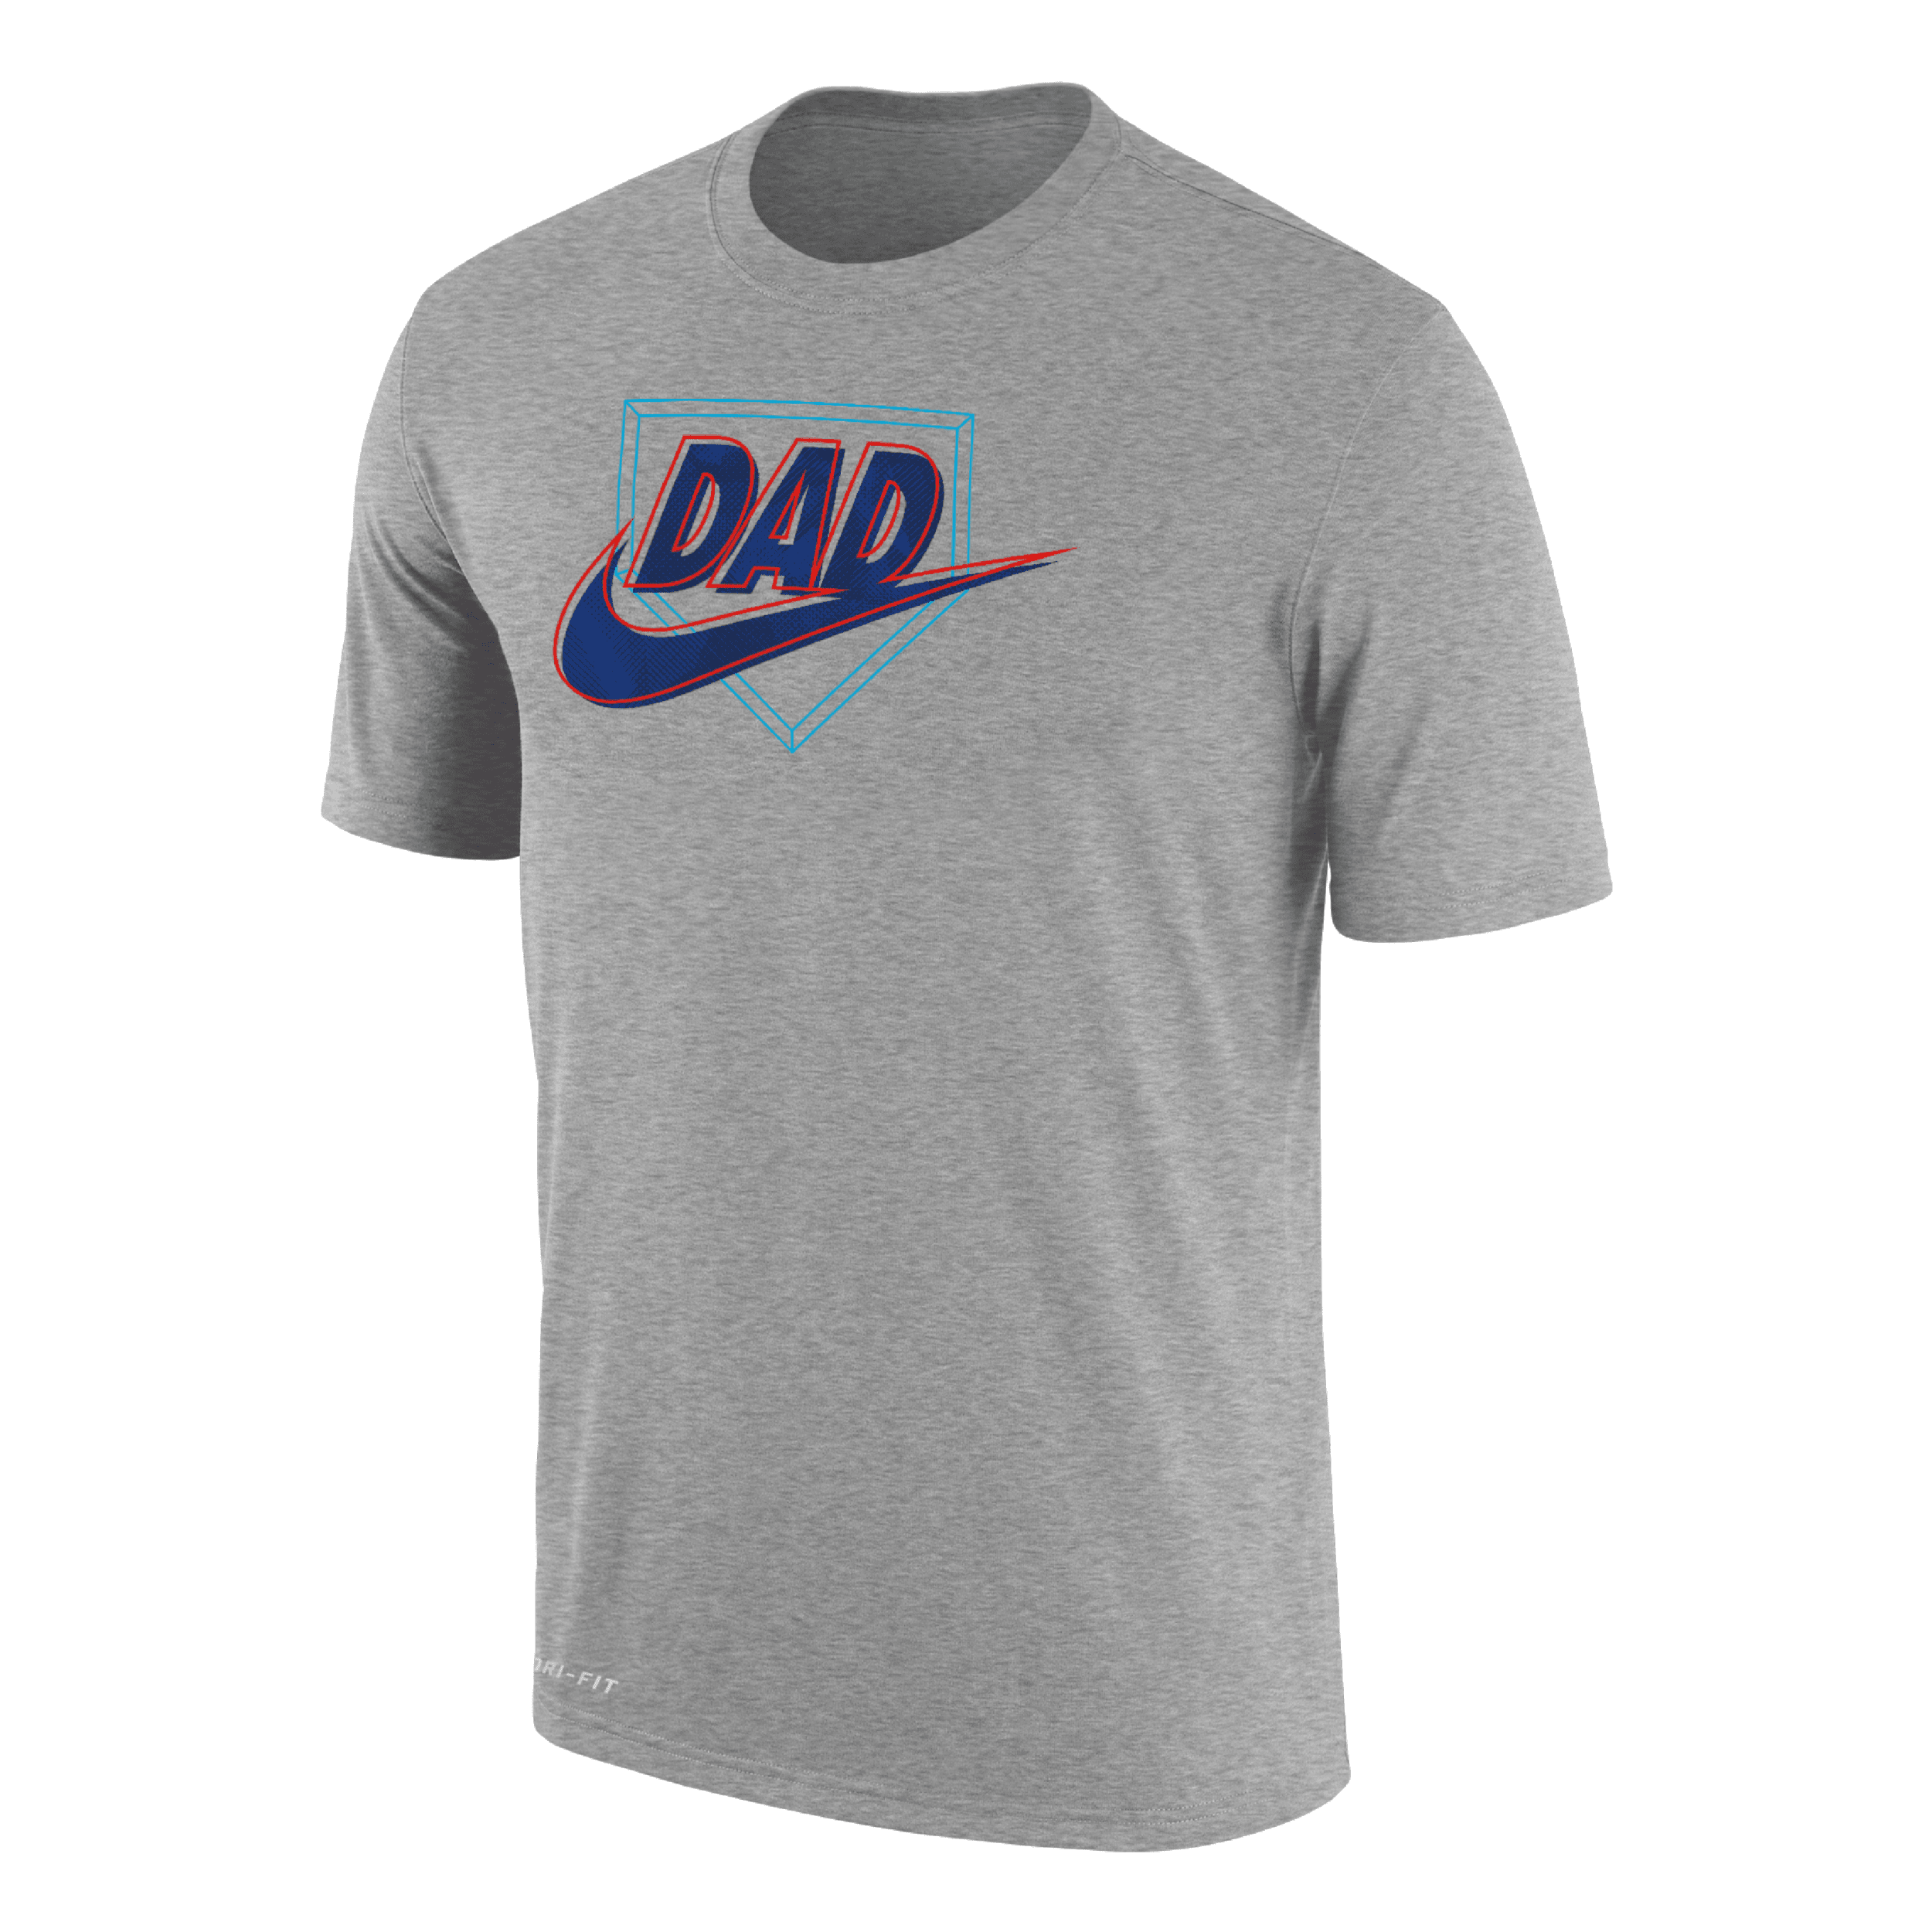 Nike Men's "father's Day" Baseball T-shirt In Grey